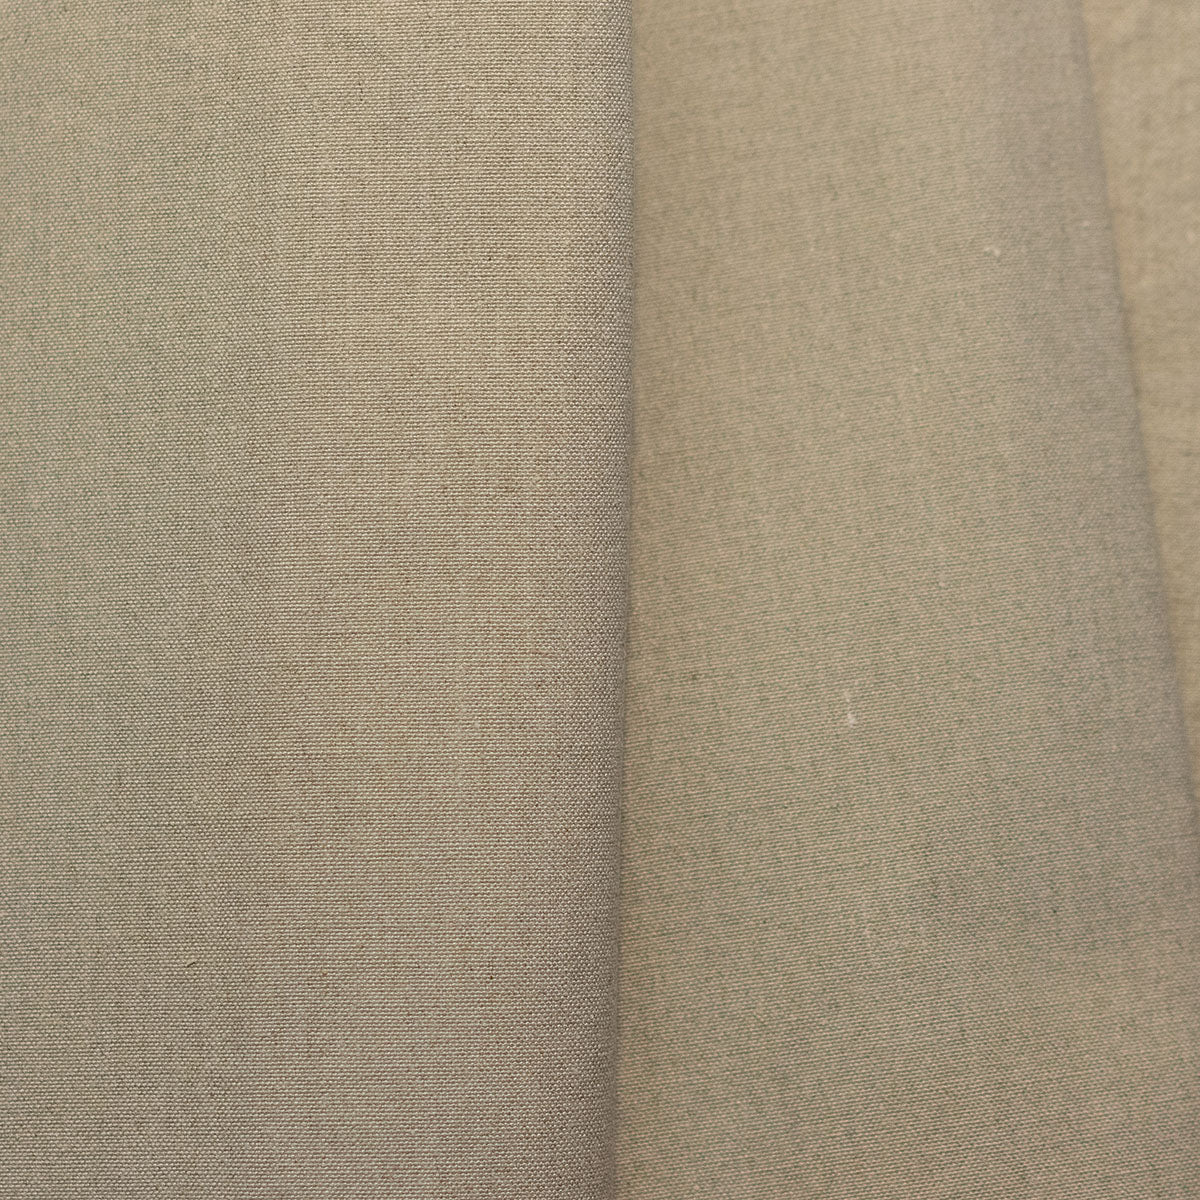 2500_W No.10 Linen canvas (washer finish)